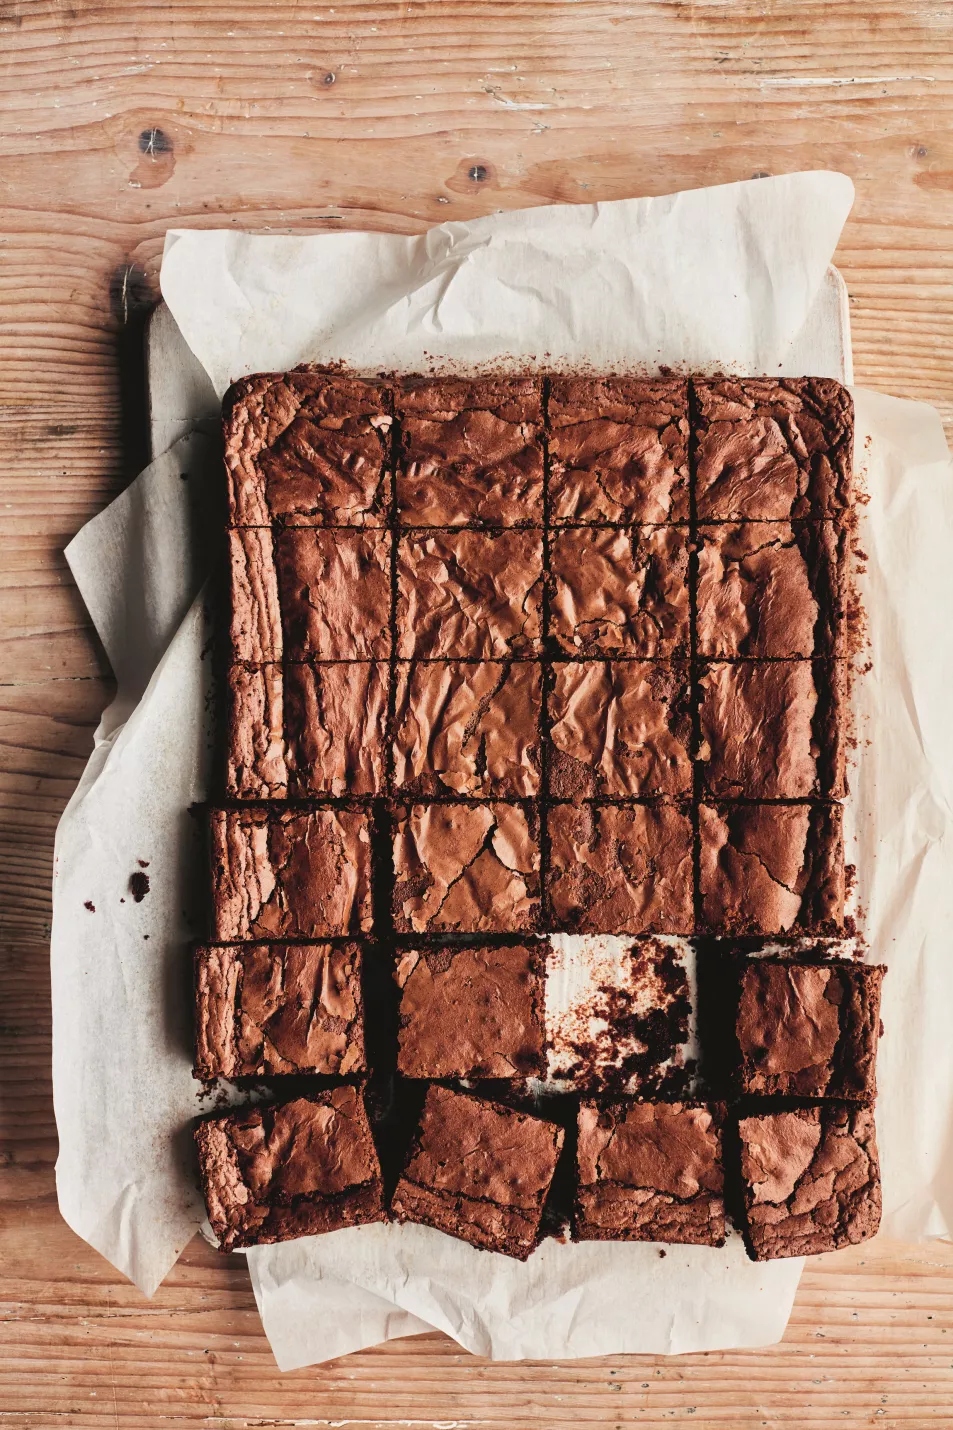 Ultimate chocolate brownies from Cook And Share